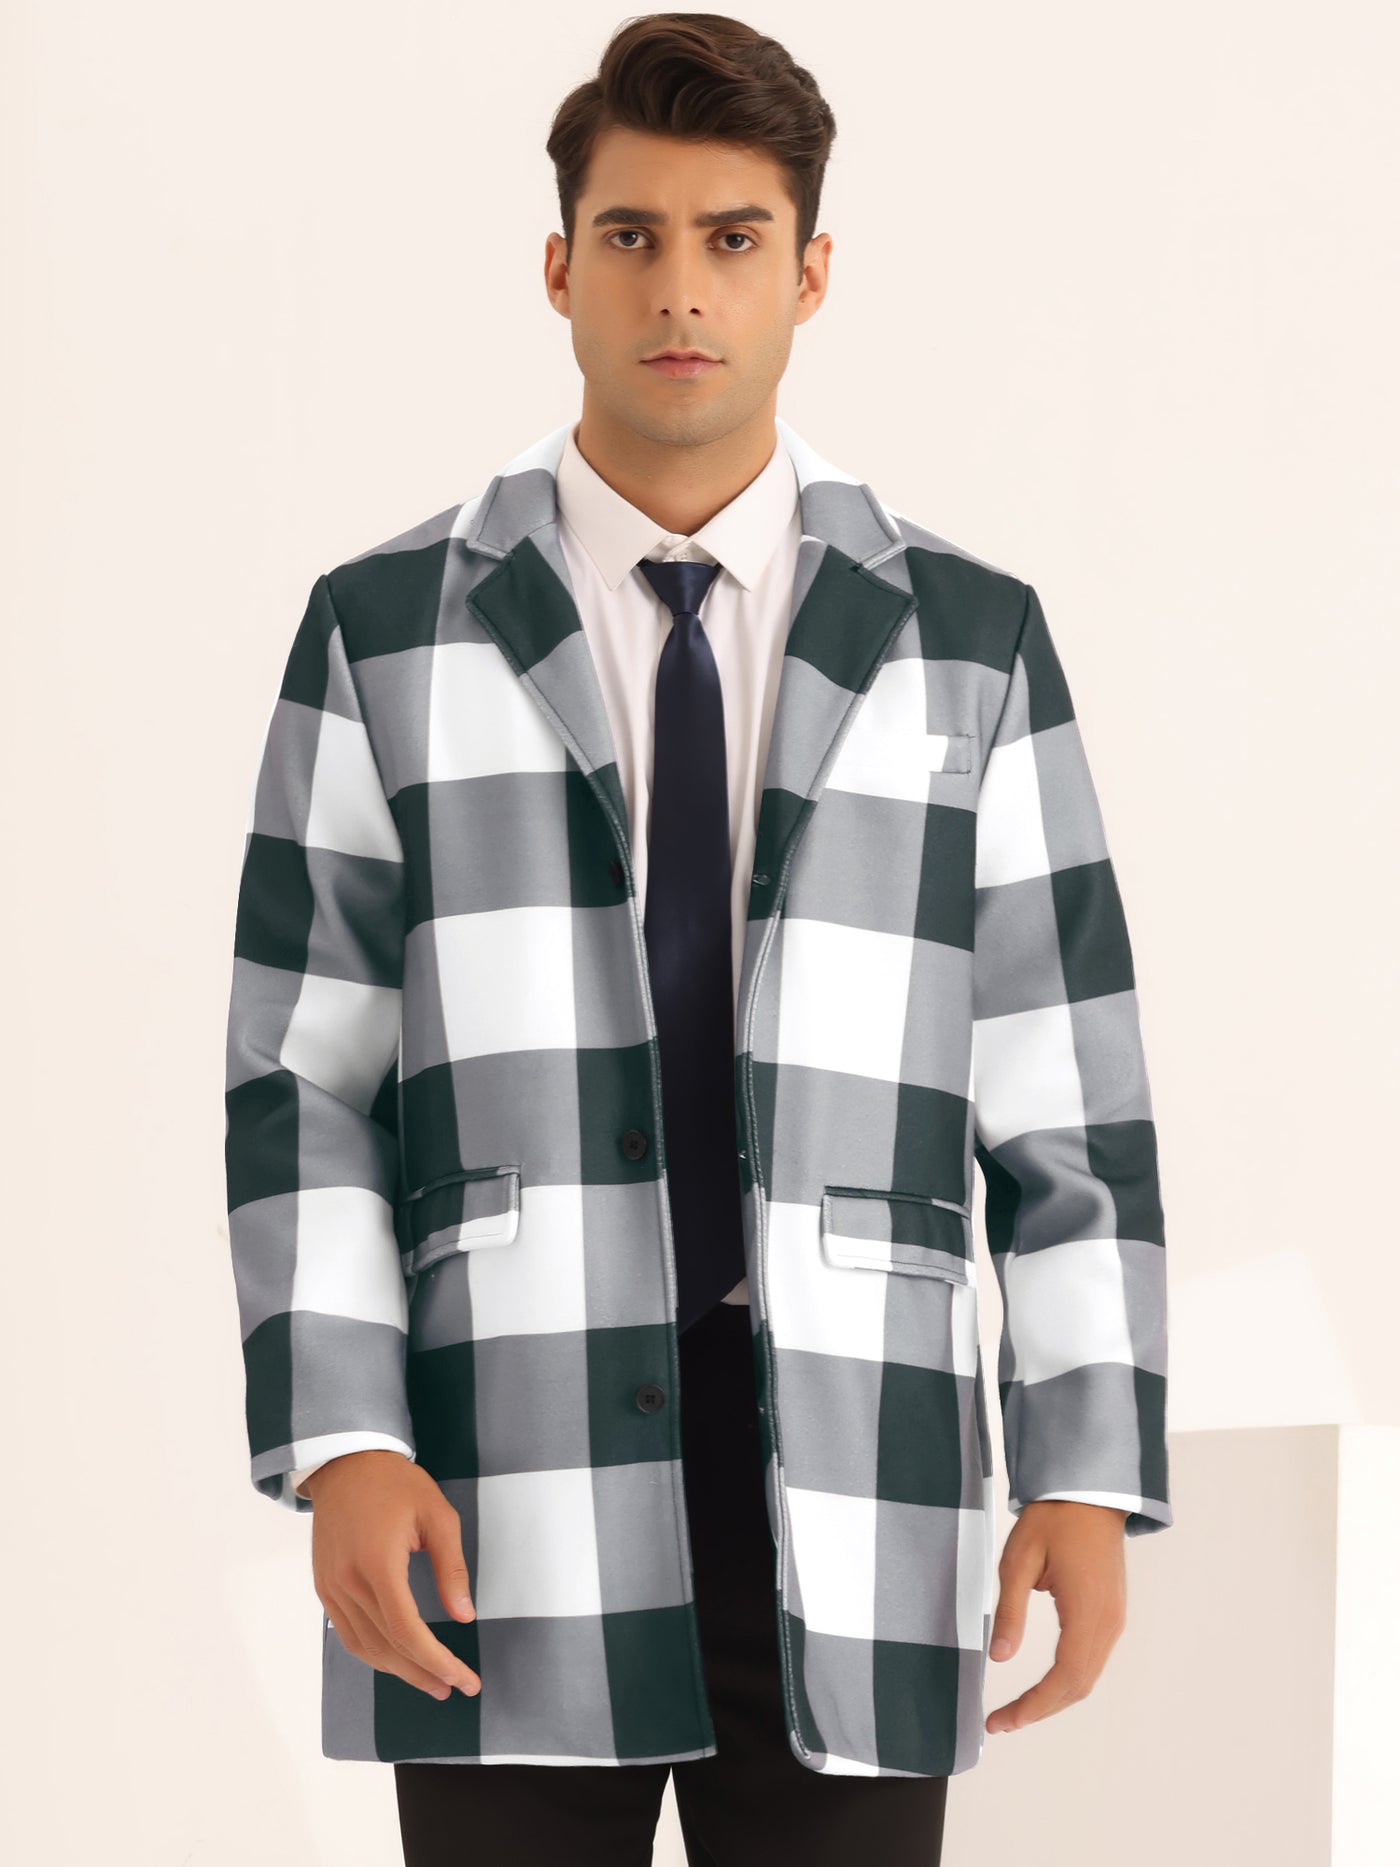 Bublédon Plaid Overcoat for Men's Notch Lapel Color Block Single Breasted Formal Checked Coat